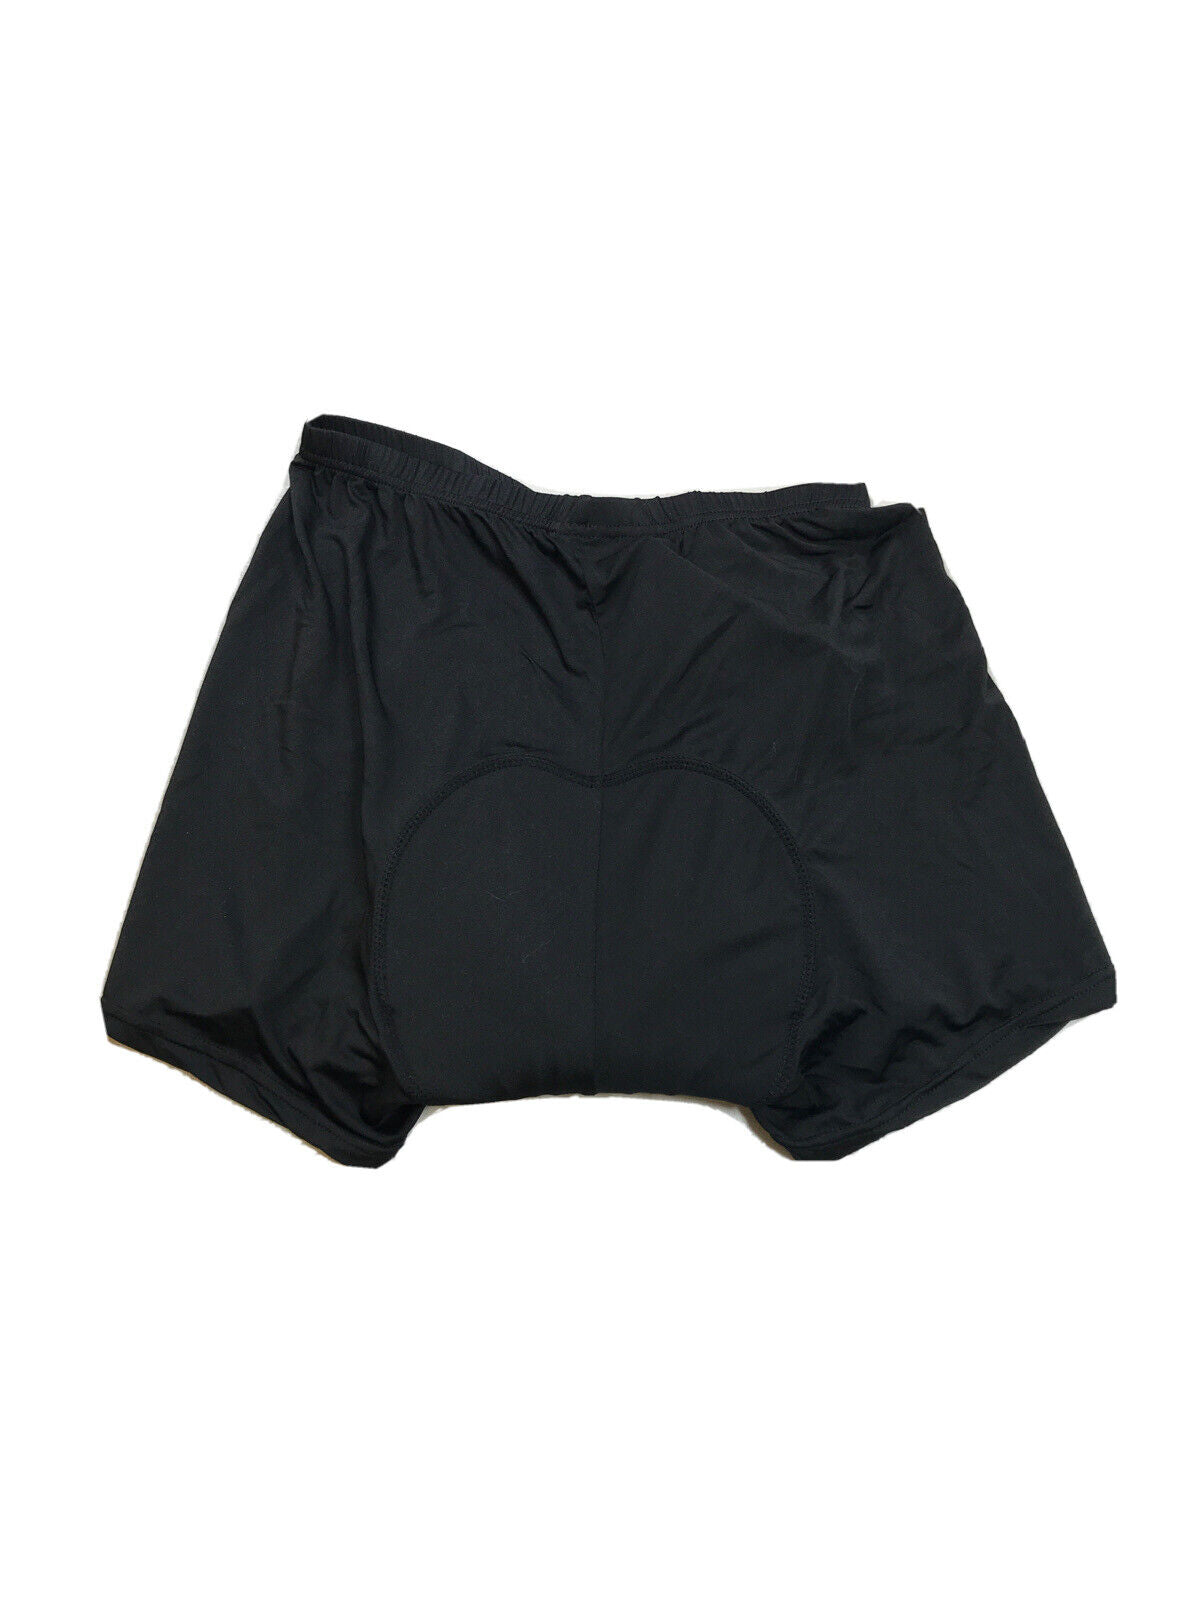 NEW Realtoo Women's Black Padded Fitted Cycling Shorts - L